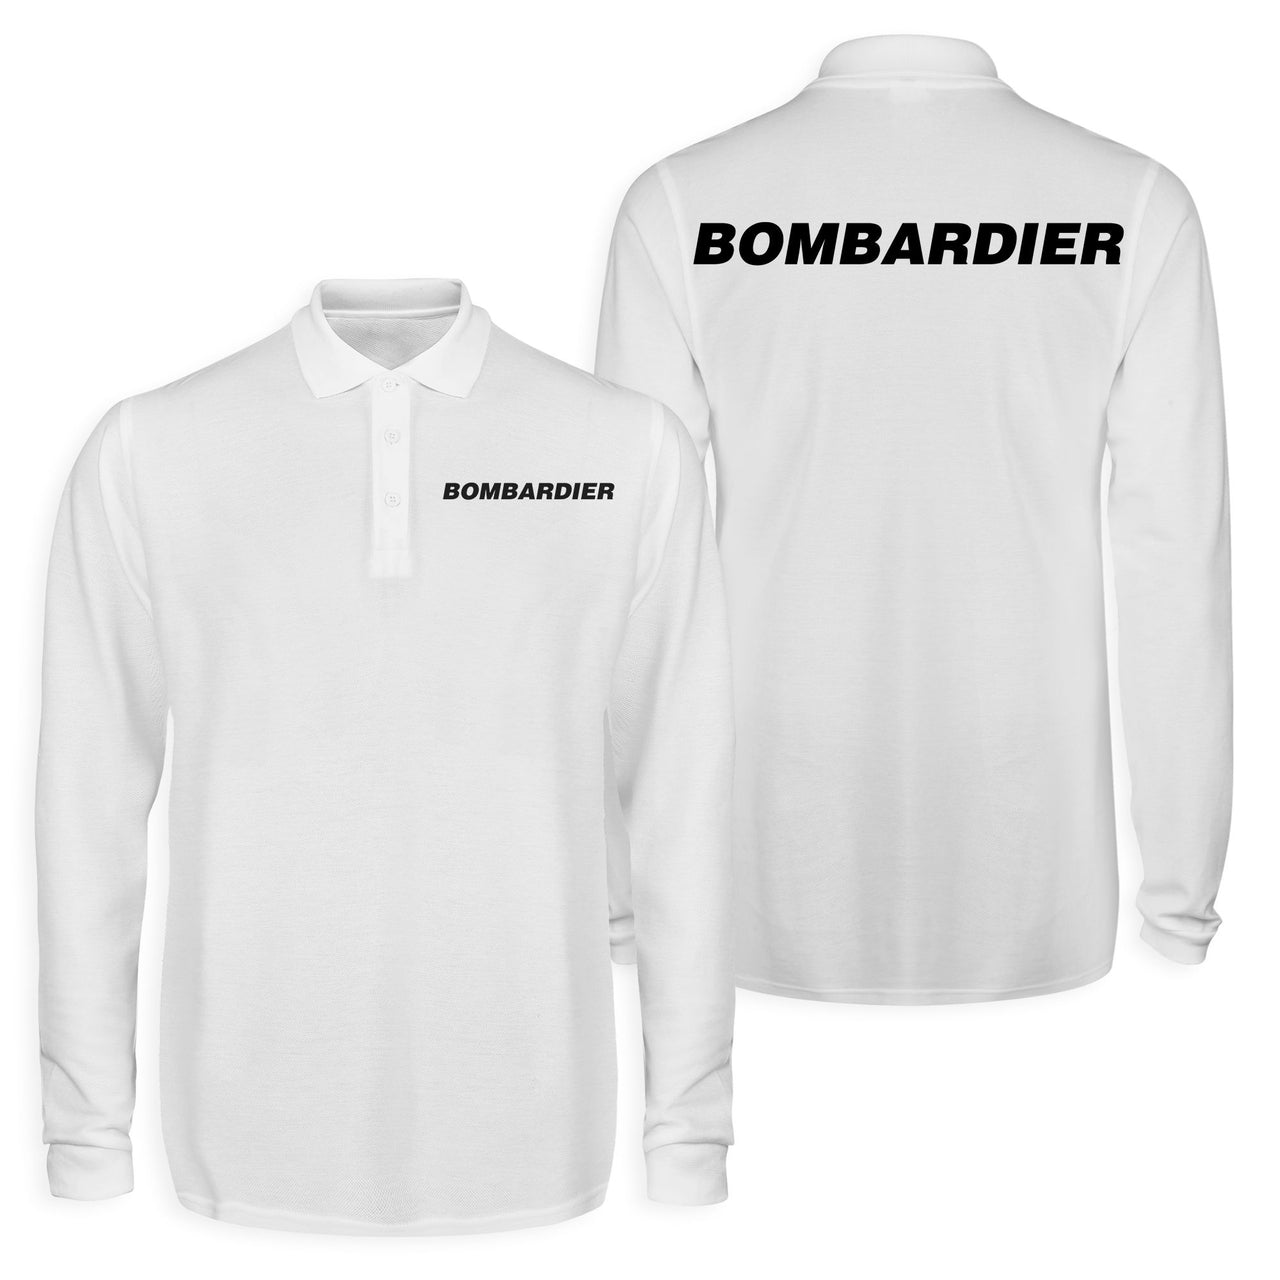 Bombardier & Text Designed Long Sleeve Polo T-Shirts (Double-Side)